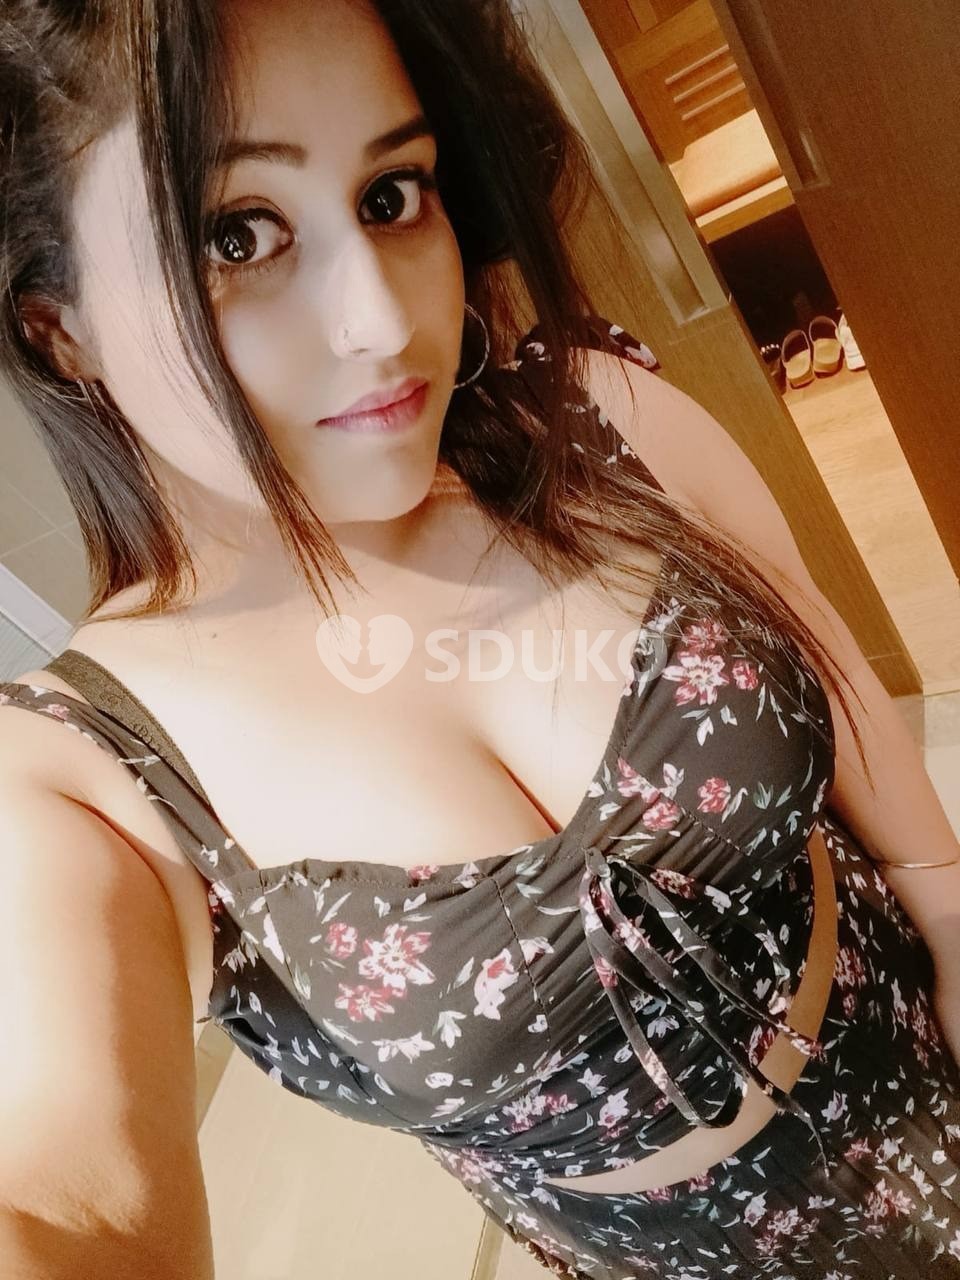 myself muskan home and hotel service available anytime call me "63758+76329"